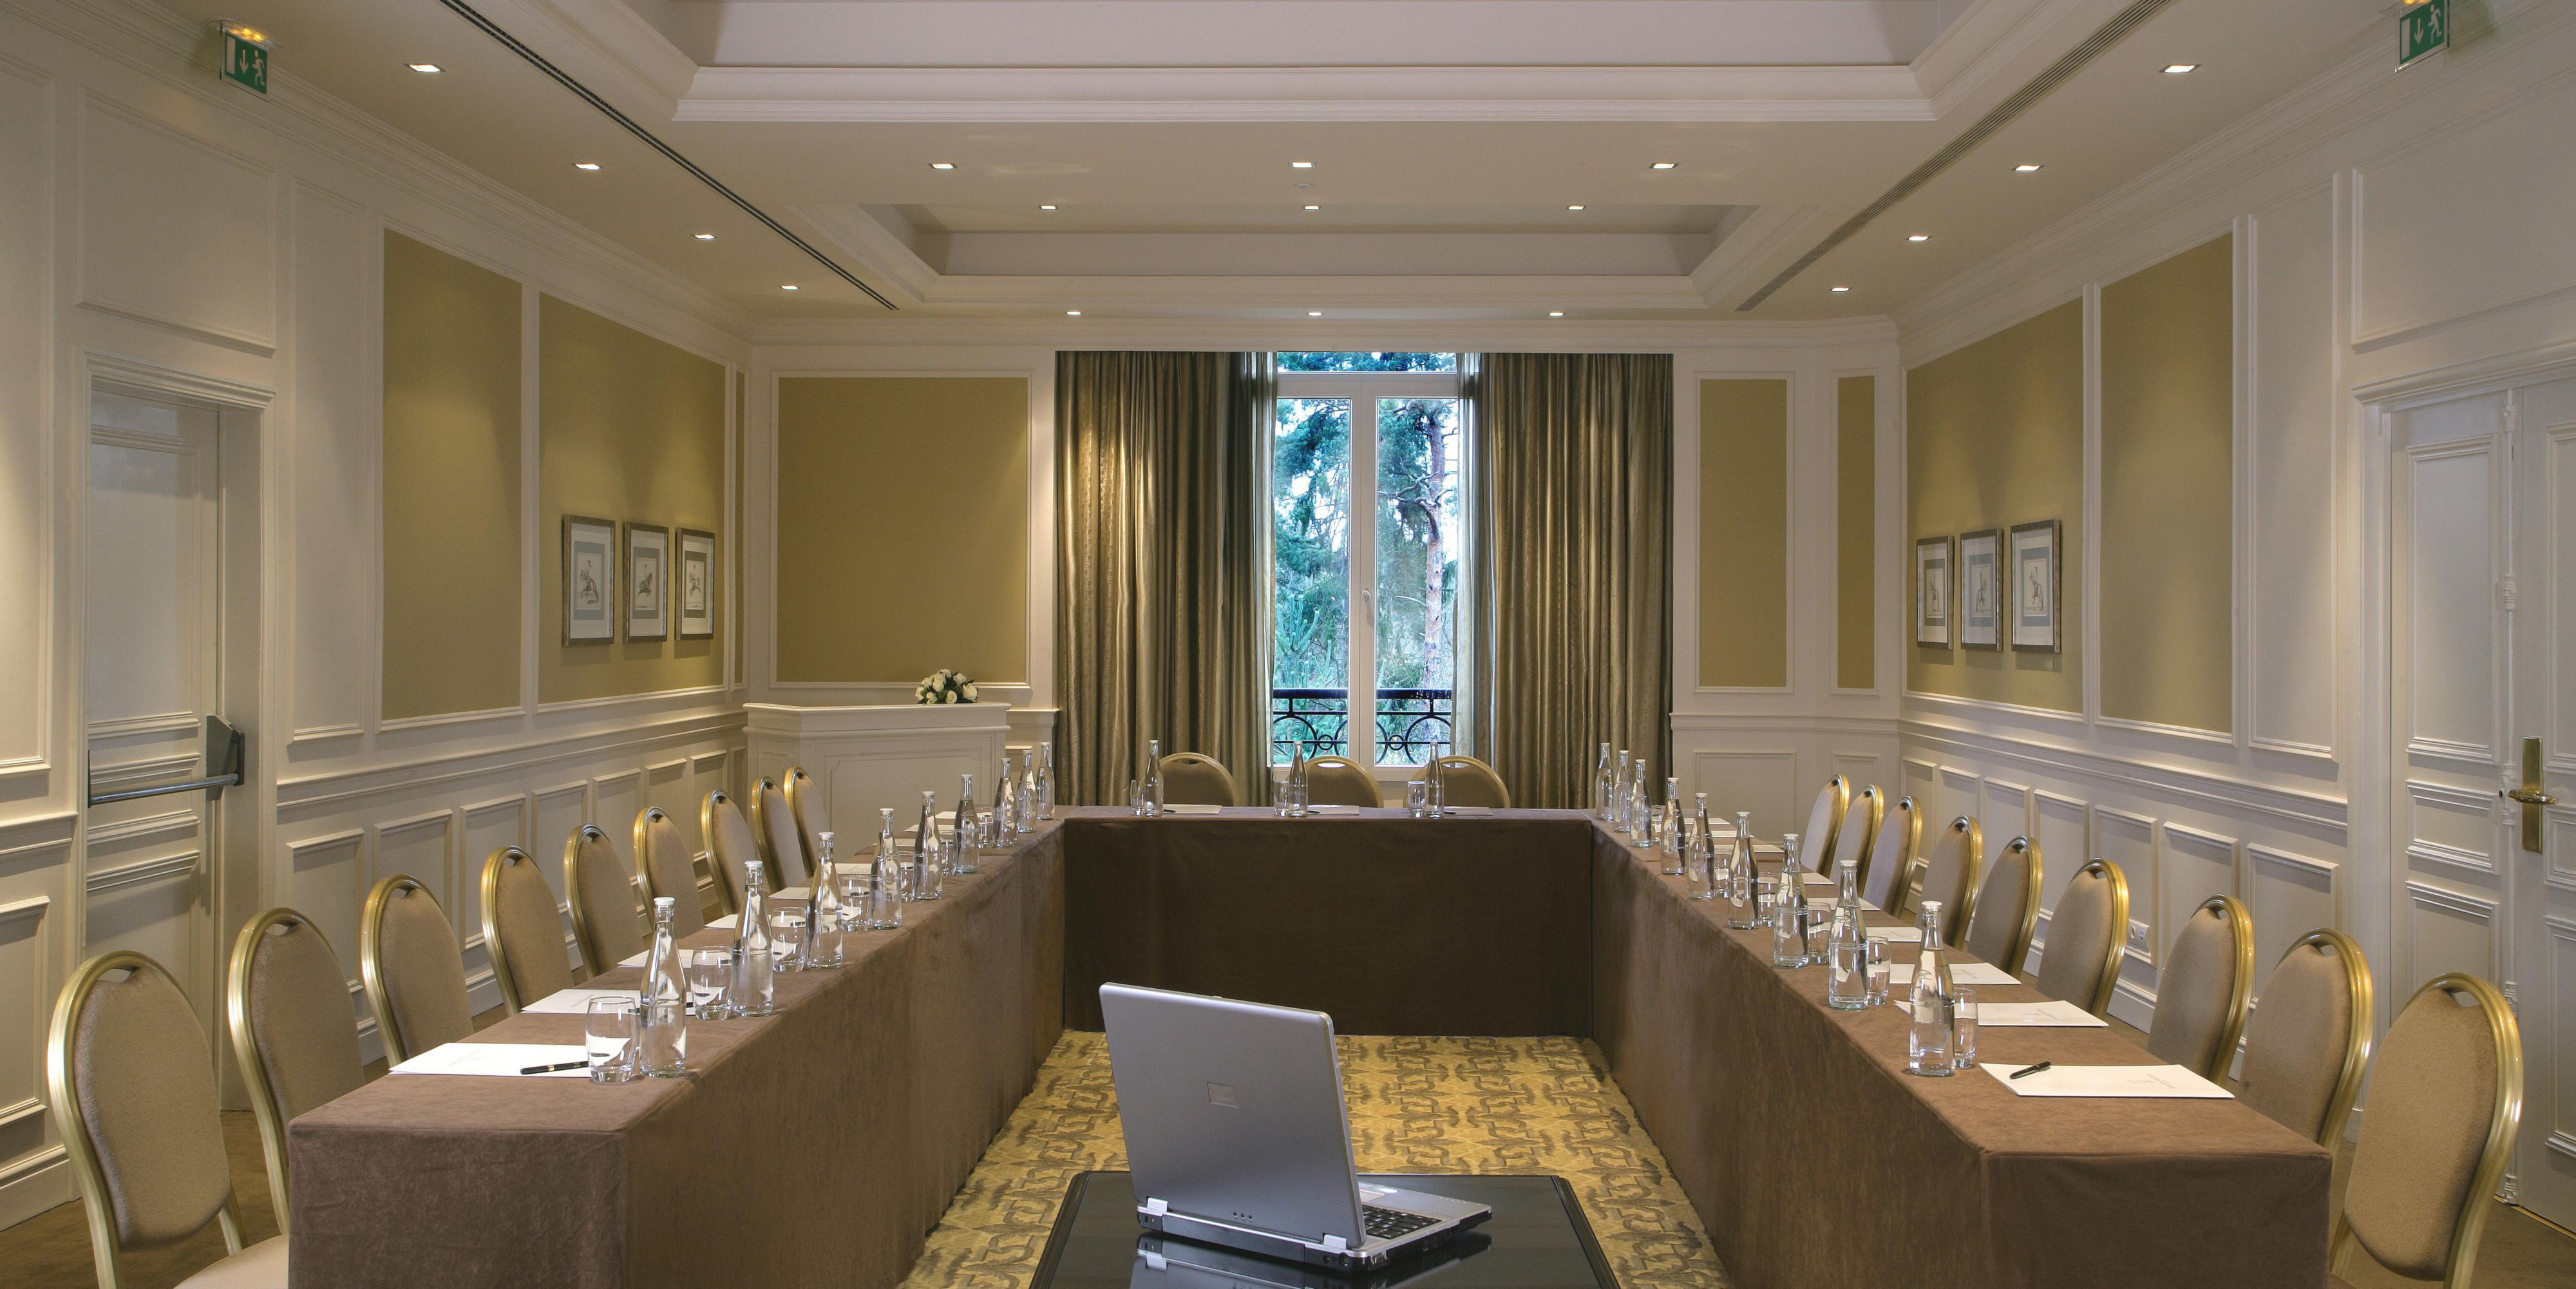 Whether you want to organize a management committee, an international conference, a product launch or a team building, the  InterContinental Chantilly can meet the demands of the highest standards. Our team is at your disposal to work alongside you to ensure the success of your event.